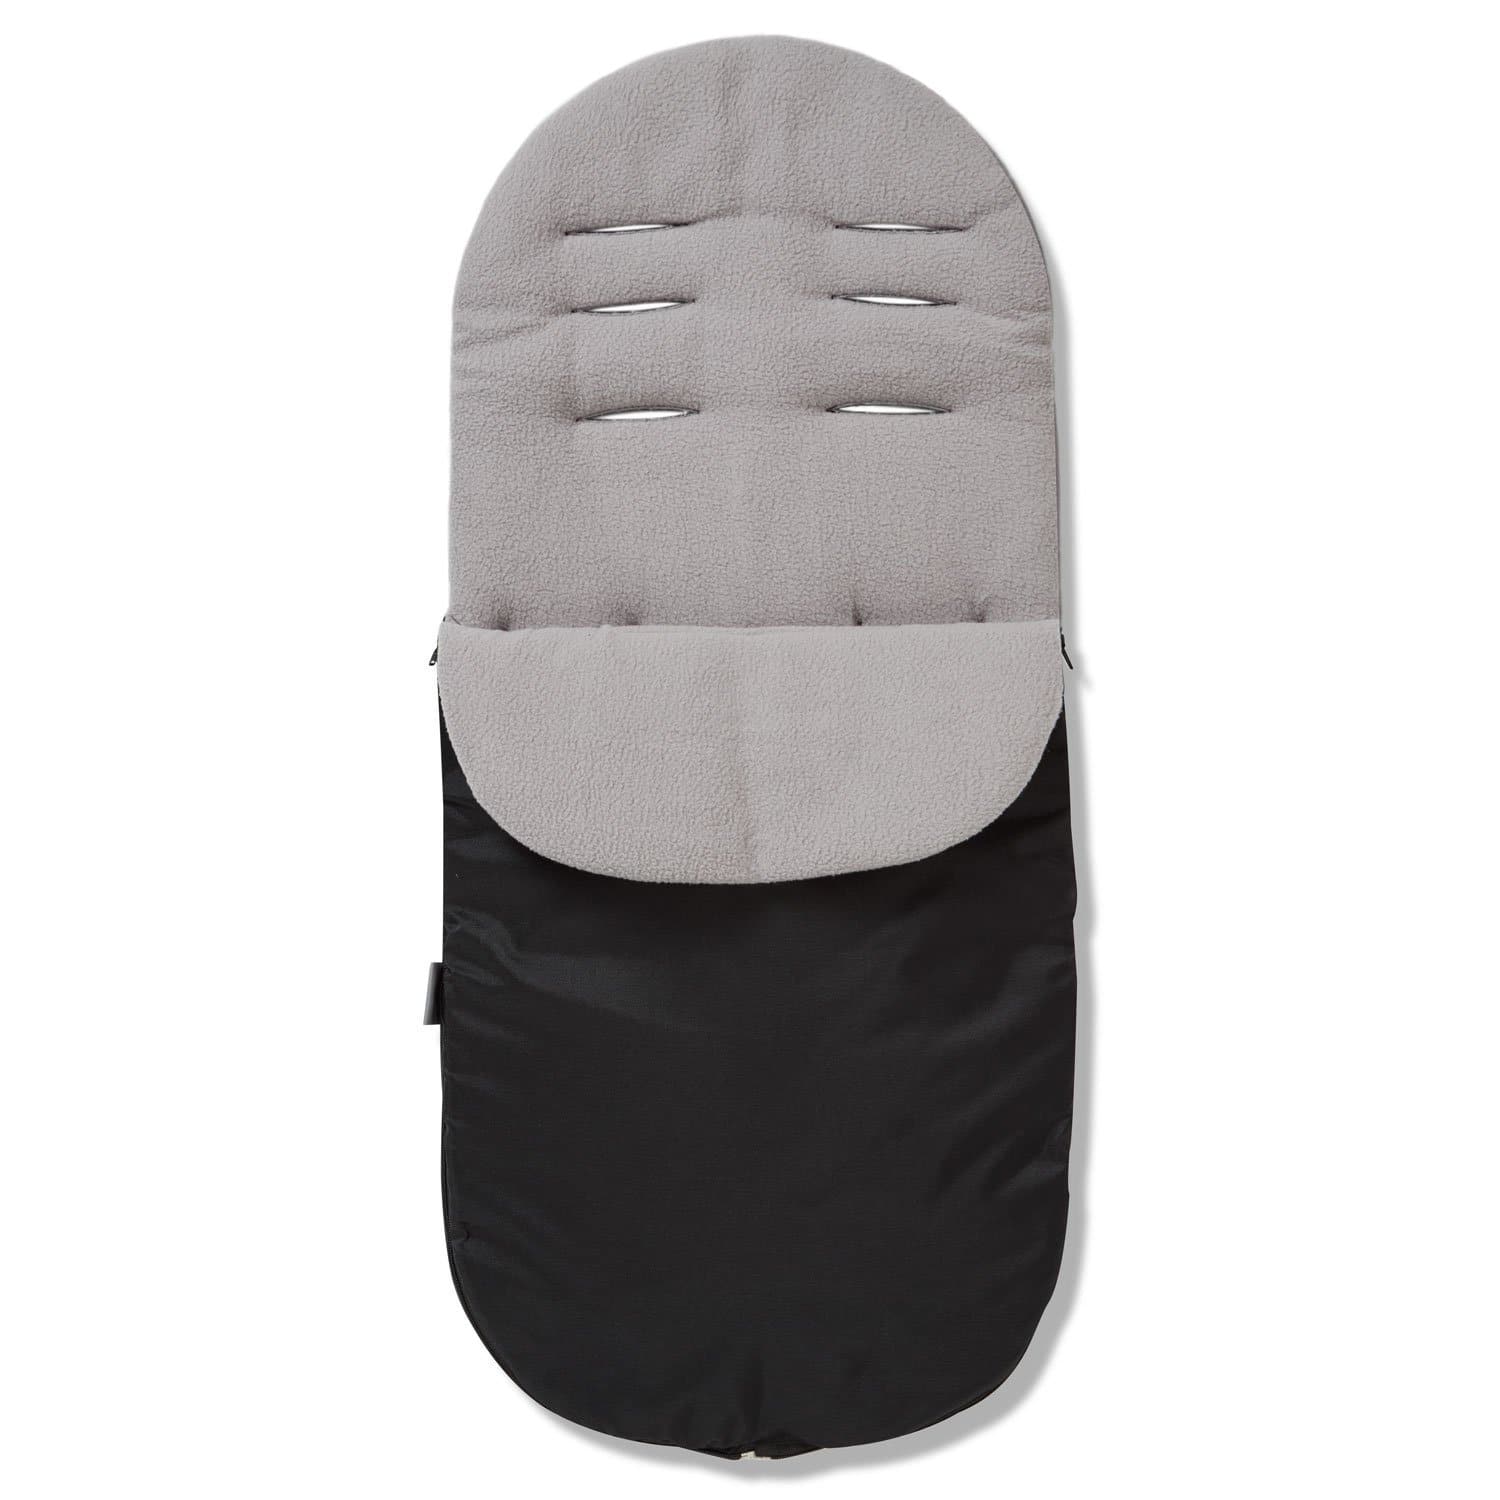 Footmuff / Cosy Toes Compatible with Babyzen - For Your Little One